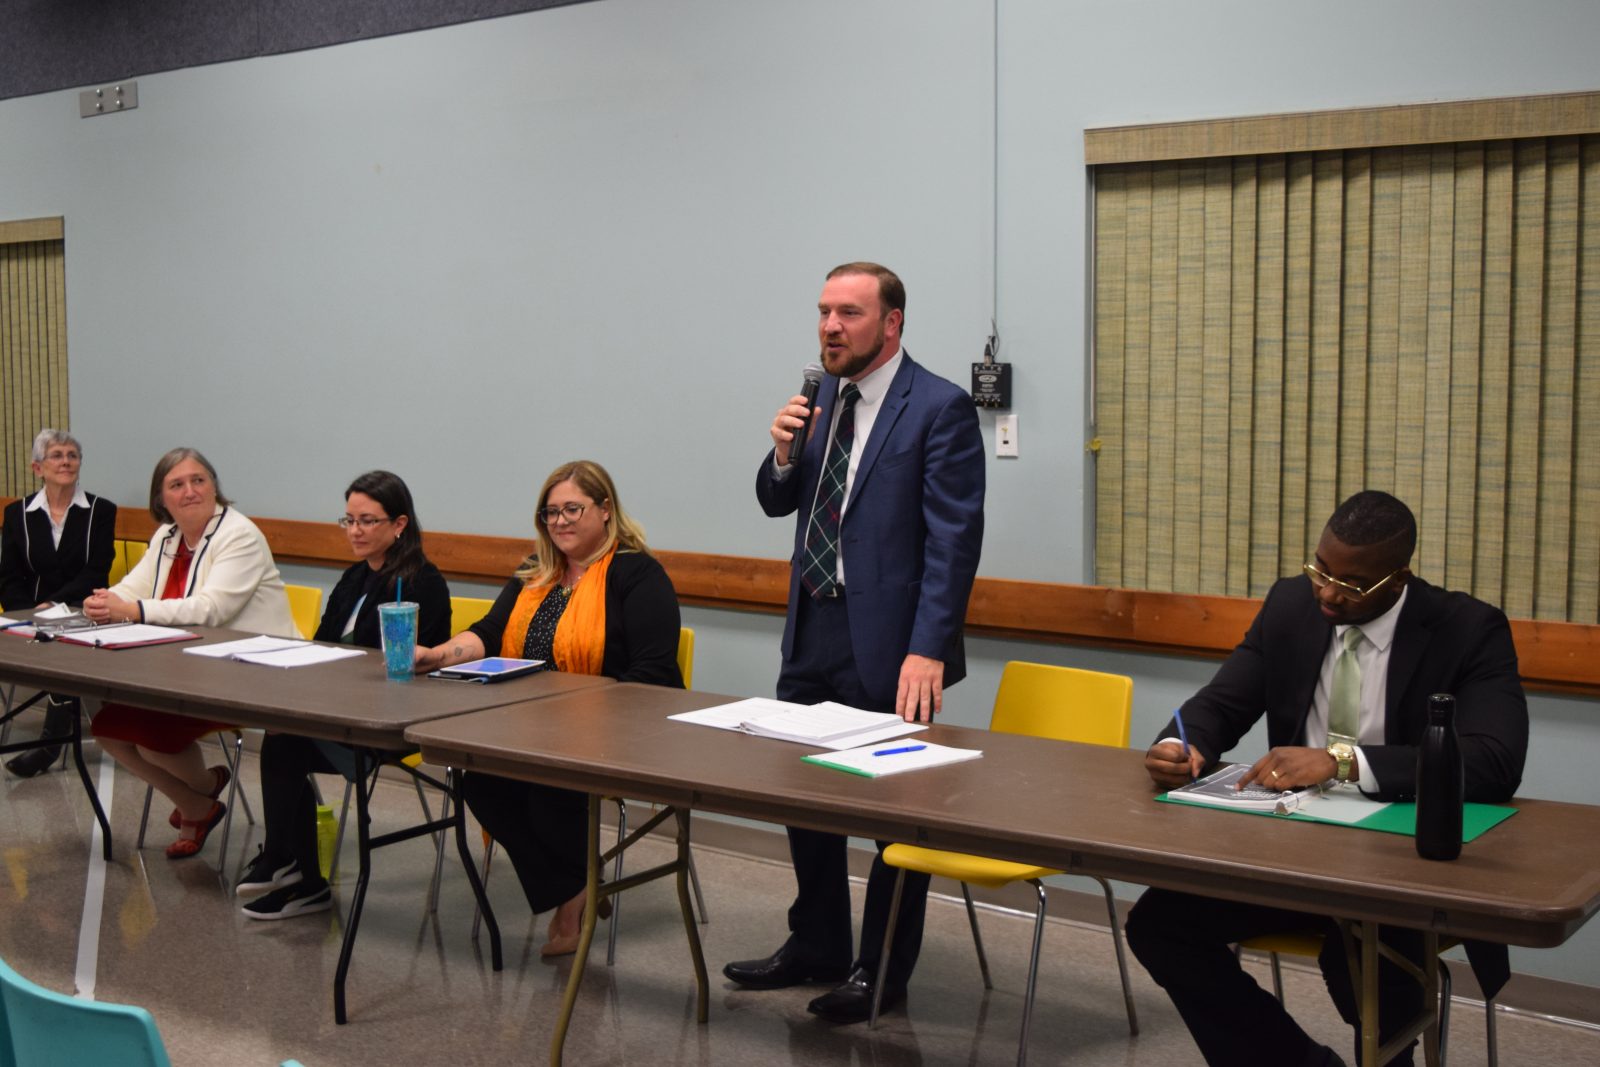 Candidates promise high speed internet, climate change plans in Martintown debate